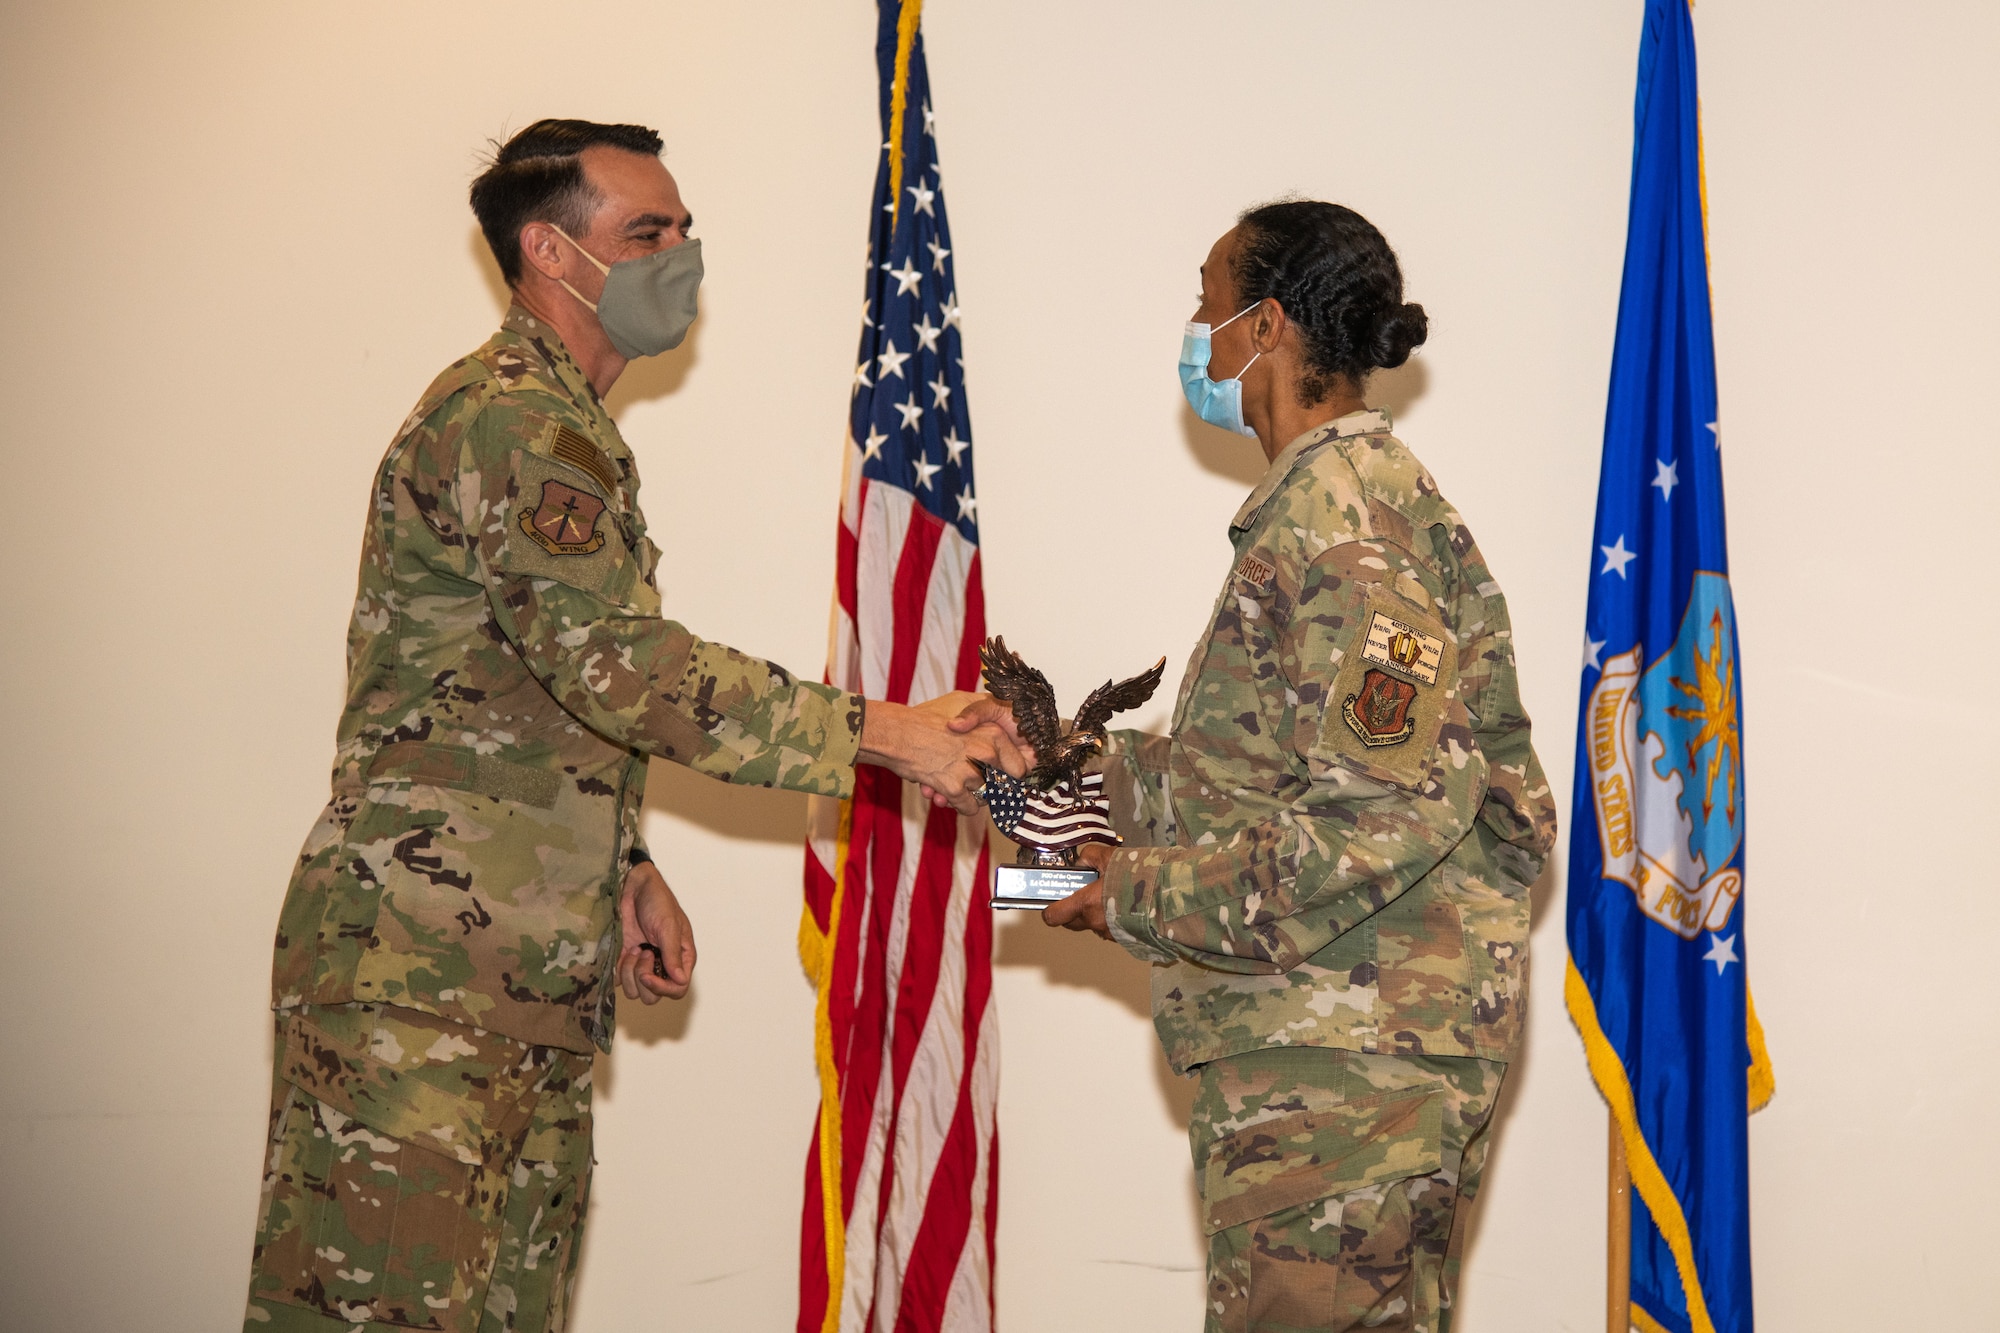 Col. Stuart M. Rubio, 403rd Wing commander, shakes Lt. Col. Marla Stewart's hand after presenting her with the Field Grade Officer of the Quarter award during a commander's call at Keesler Air Force Base, Miss. Sept. 12, 2021. Stewart was recognized for her work within the 403rd Aeromedical Staging Squadron during the months of January through March this year.  (U.S. Air Force photo by Staff Sgt. Kristen Pittman)